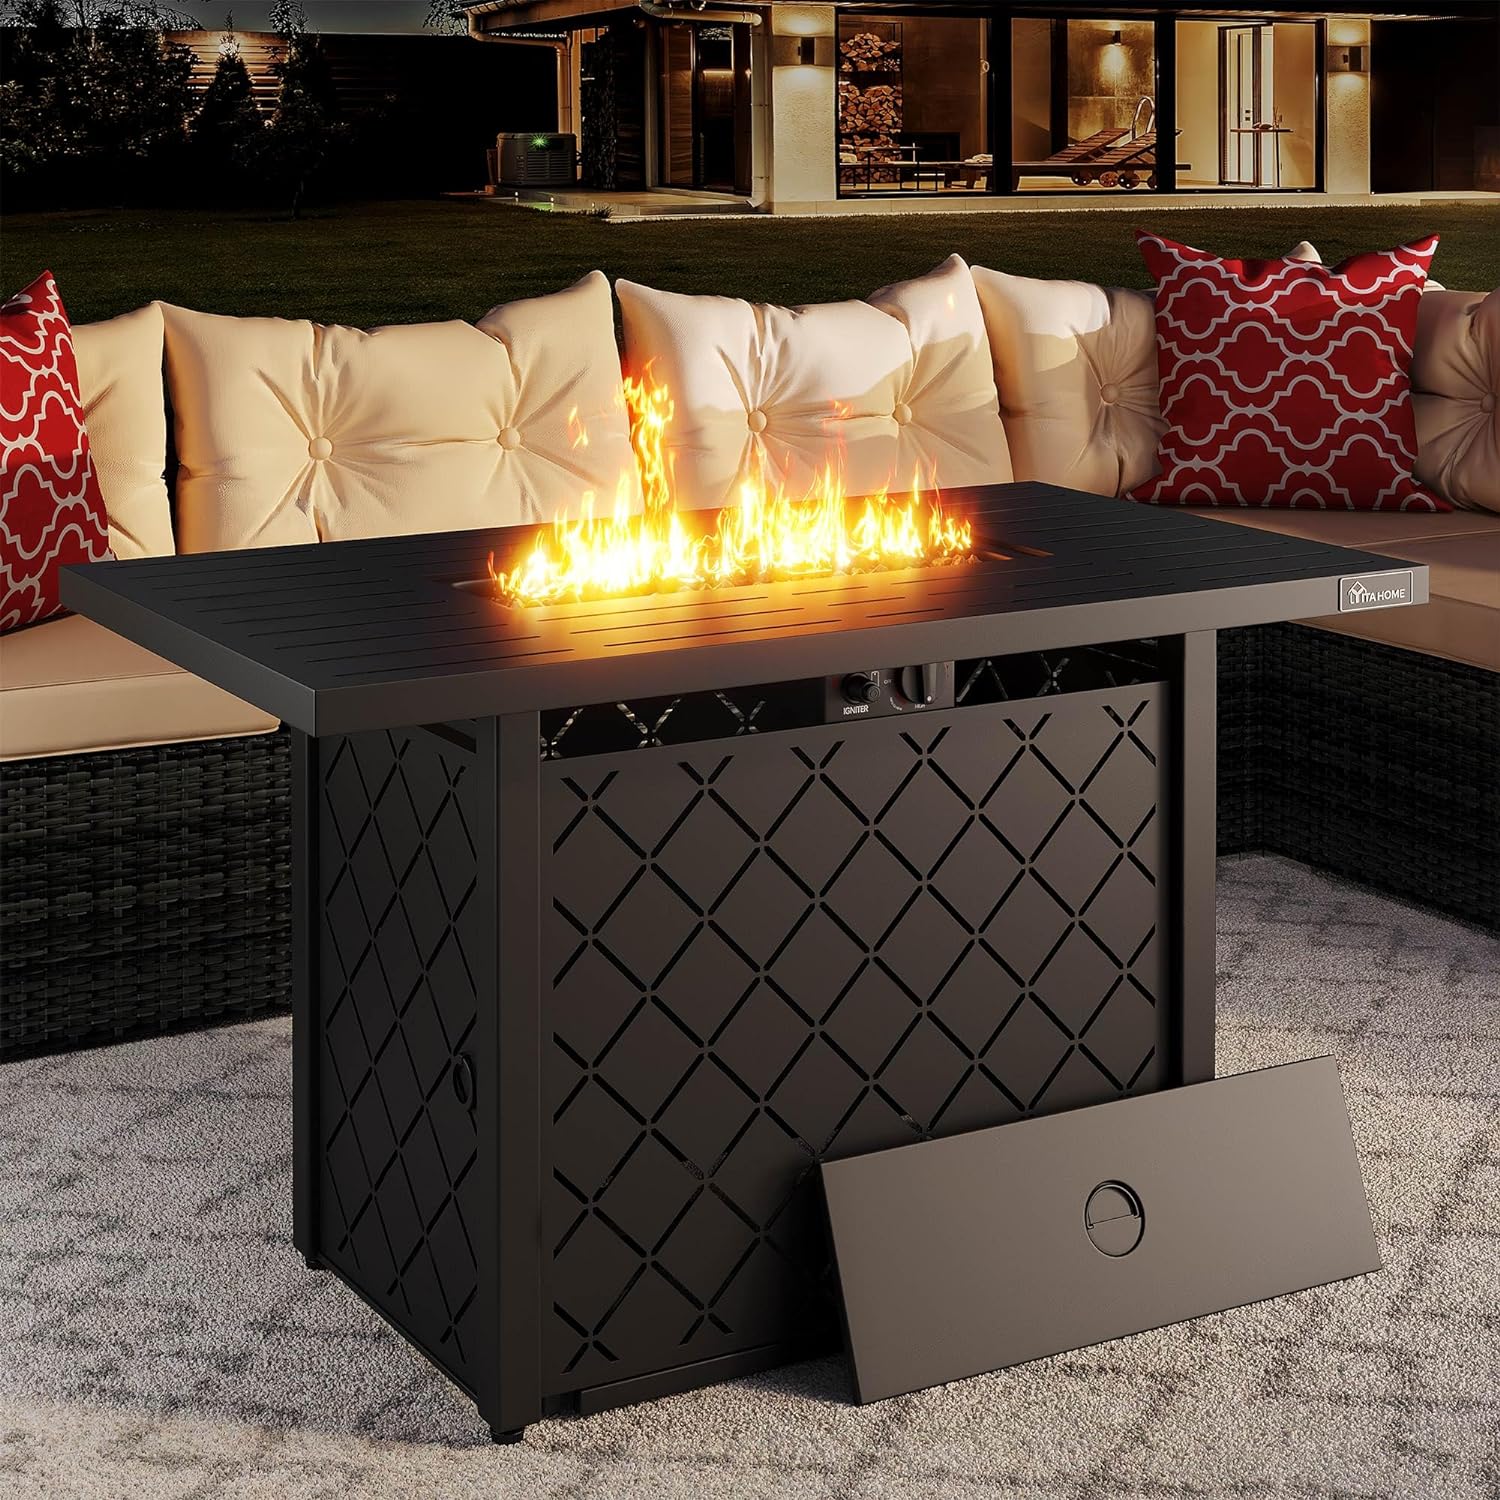 YITAHOME Fire Pit Table Review